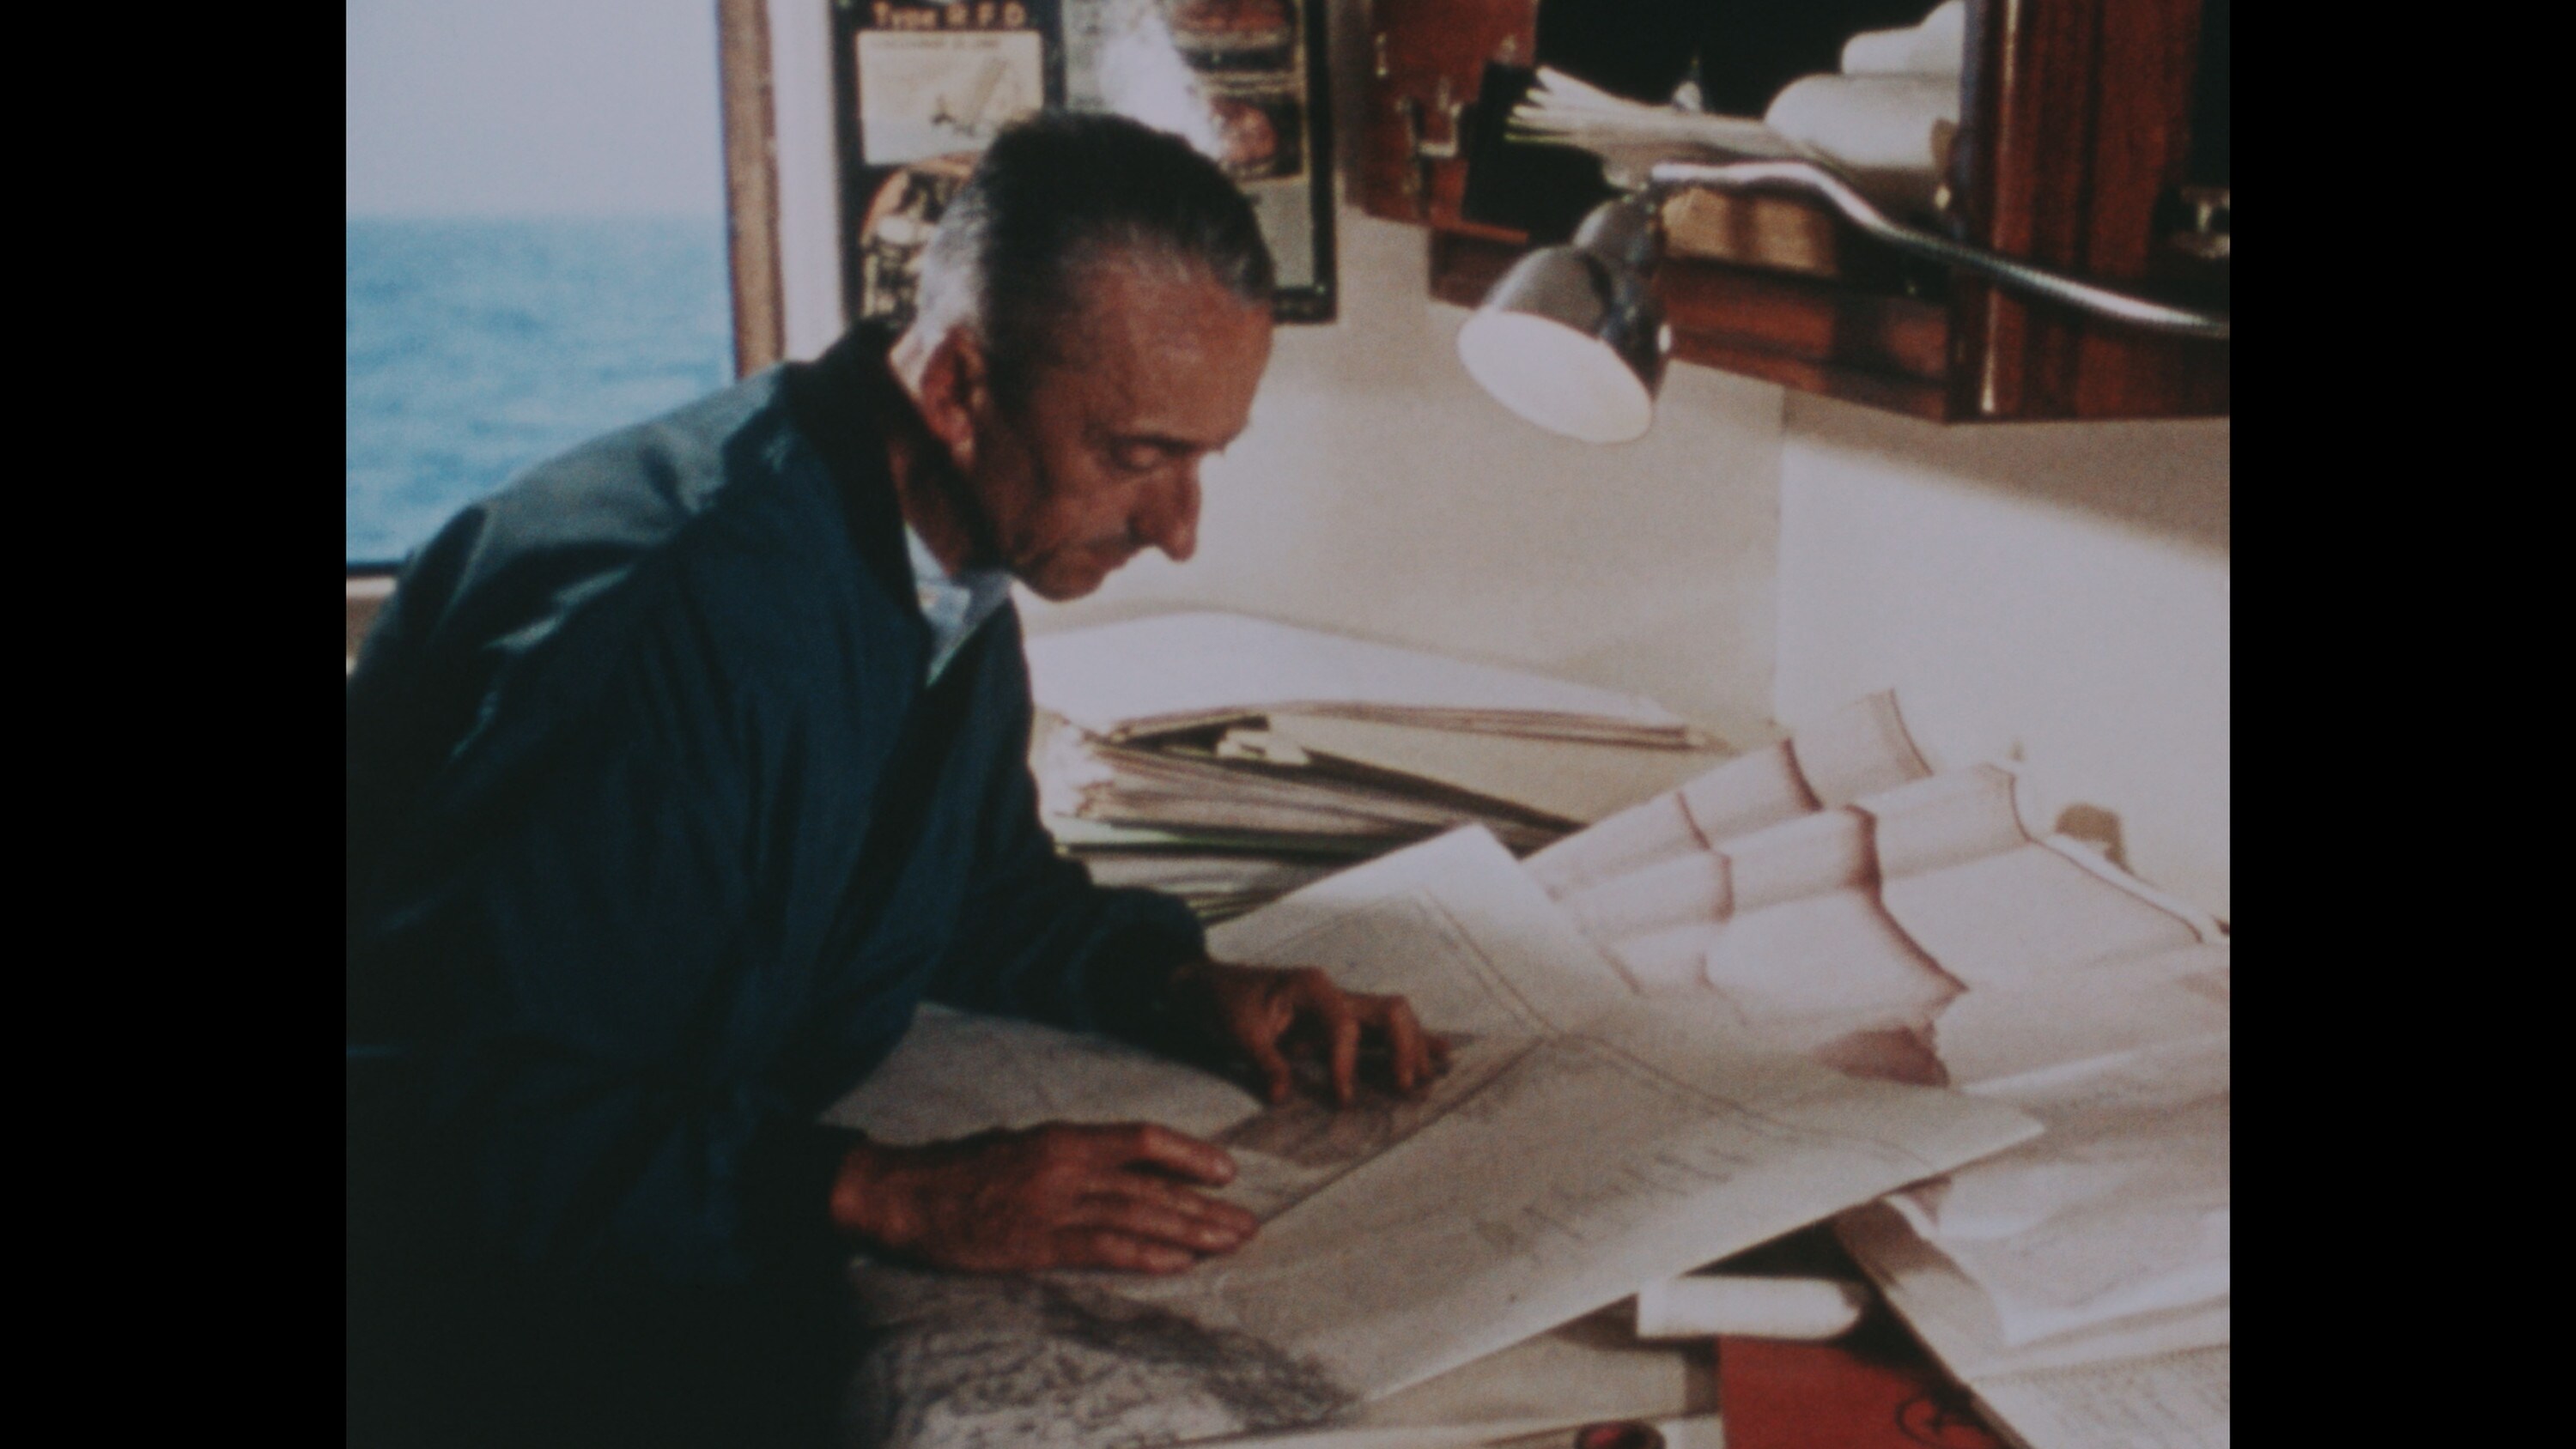 Jacques Cousteau examines charts aboard his ship, Calypso. (Credit: The Cousteau Society)